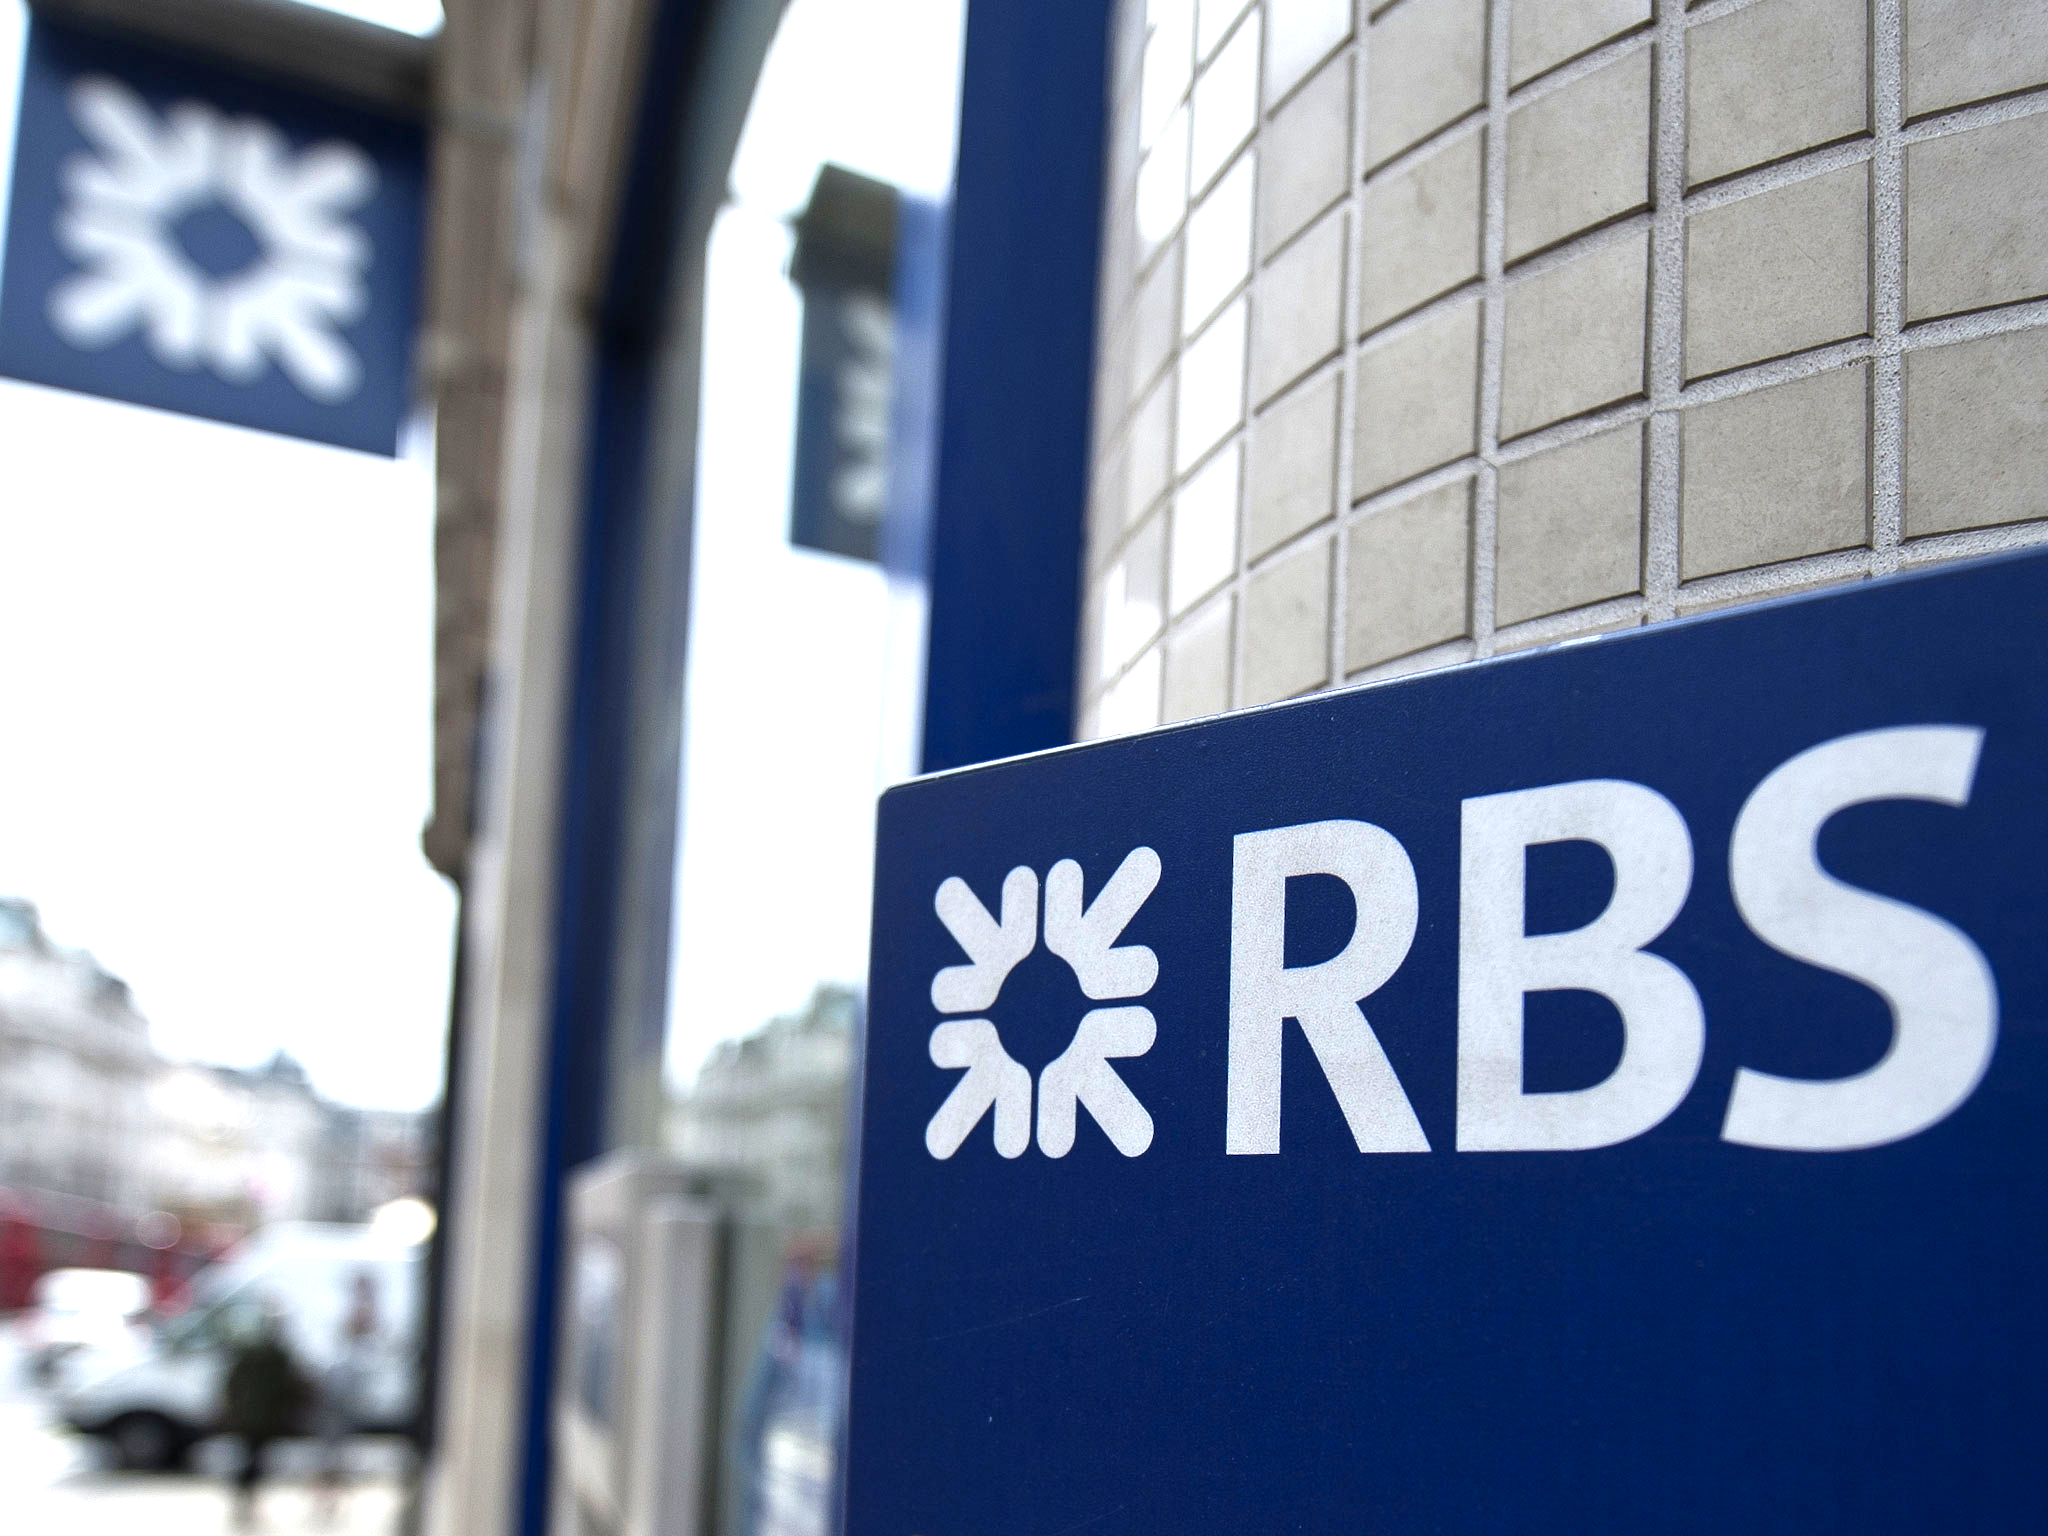 Eight banks, including RBS, have been fined a record £1.4bn over rate rigging scandal